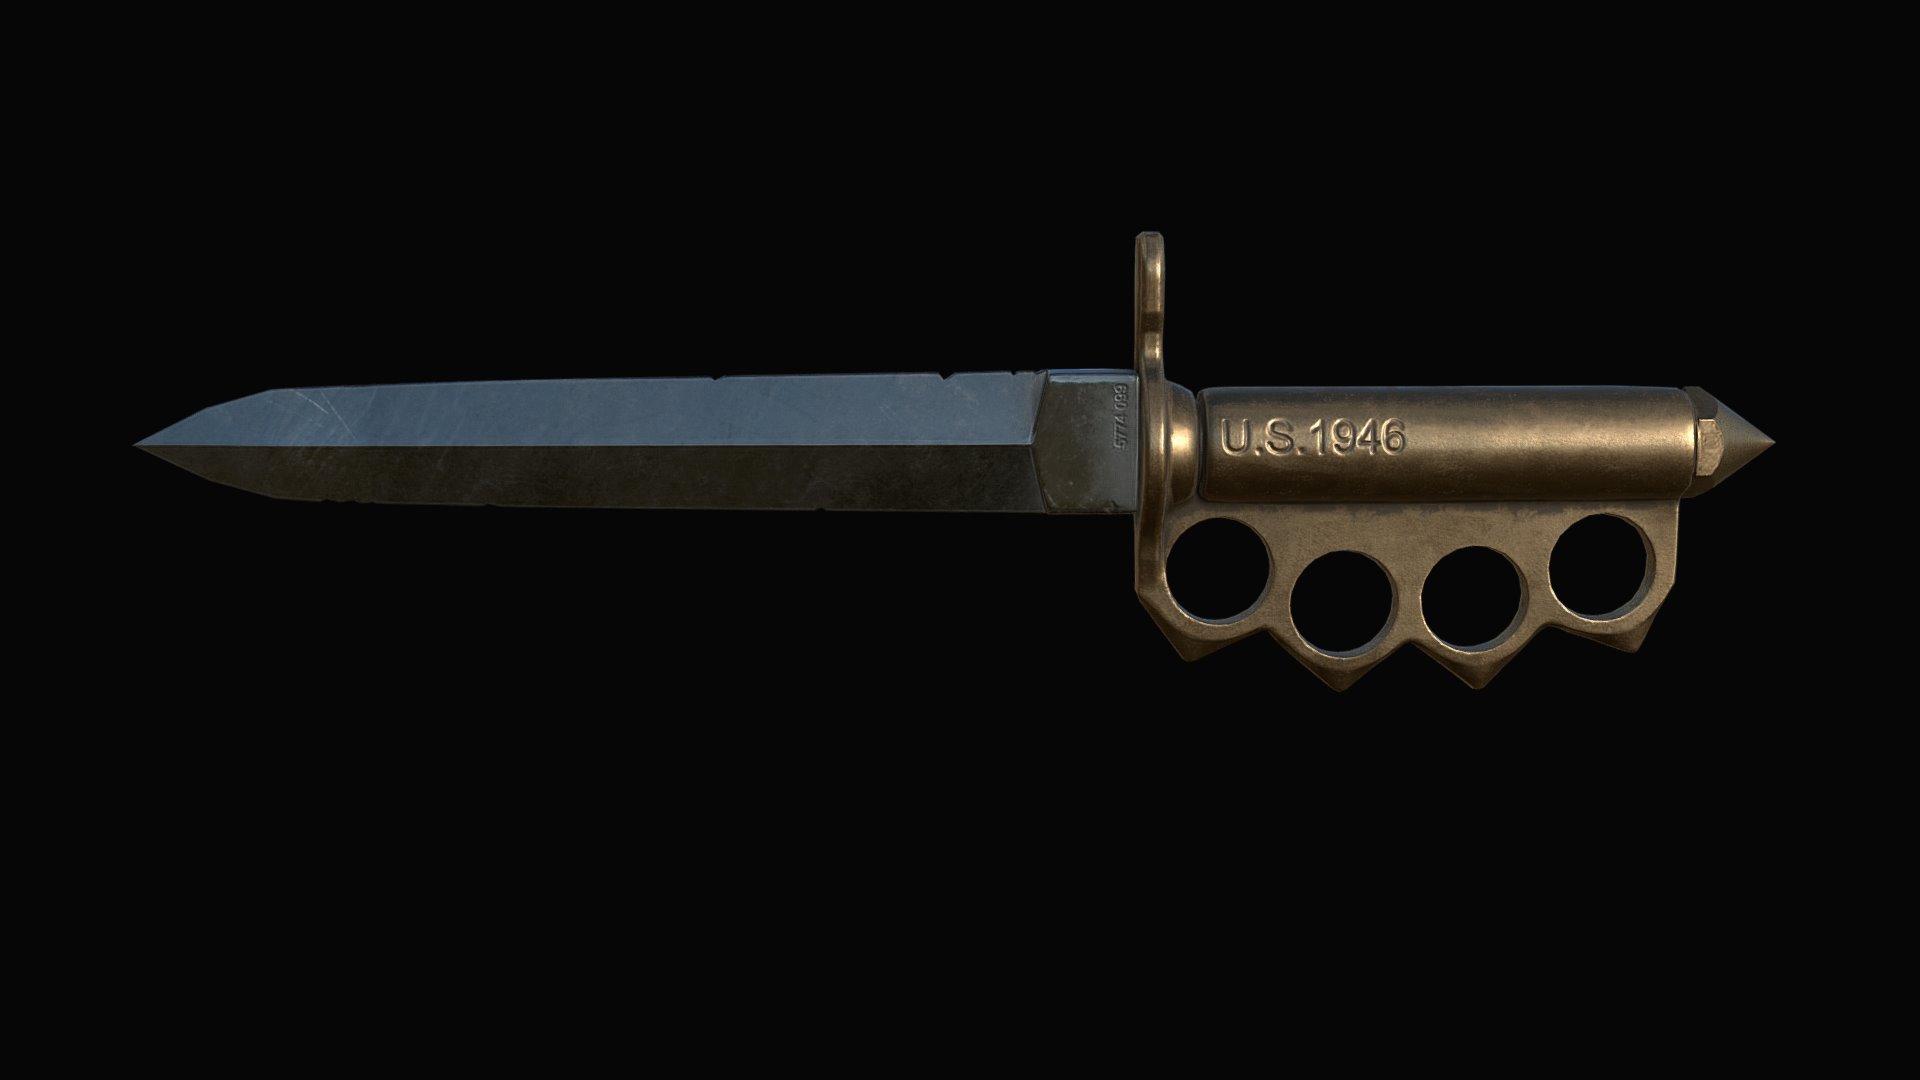 Currrently I am working on an environment inspired by the Wolfenstein Universe. This is one of my props for the scene&hellip; - Trench Knife inspired by Wolfenstein - 3D model by Dennis Bienert (@flatpanic) 3d model